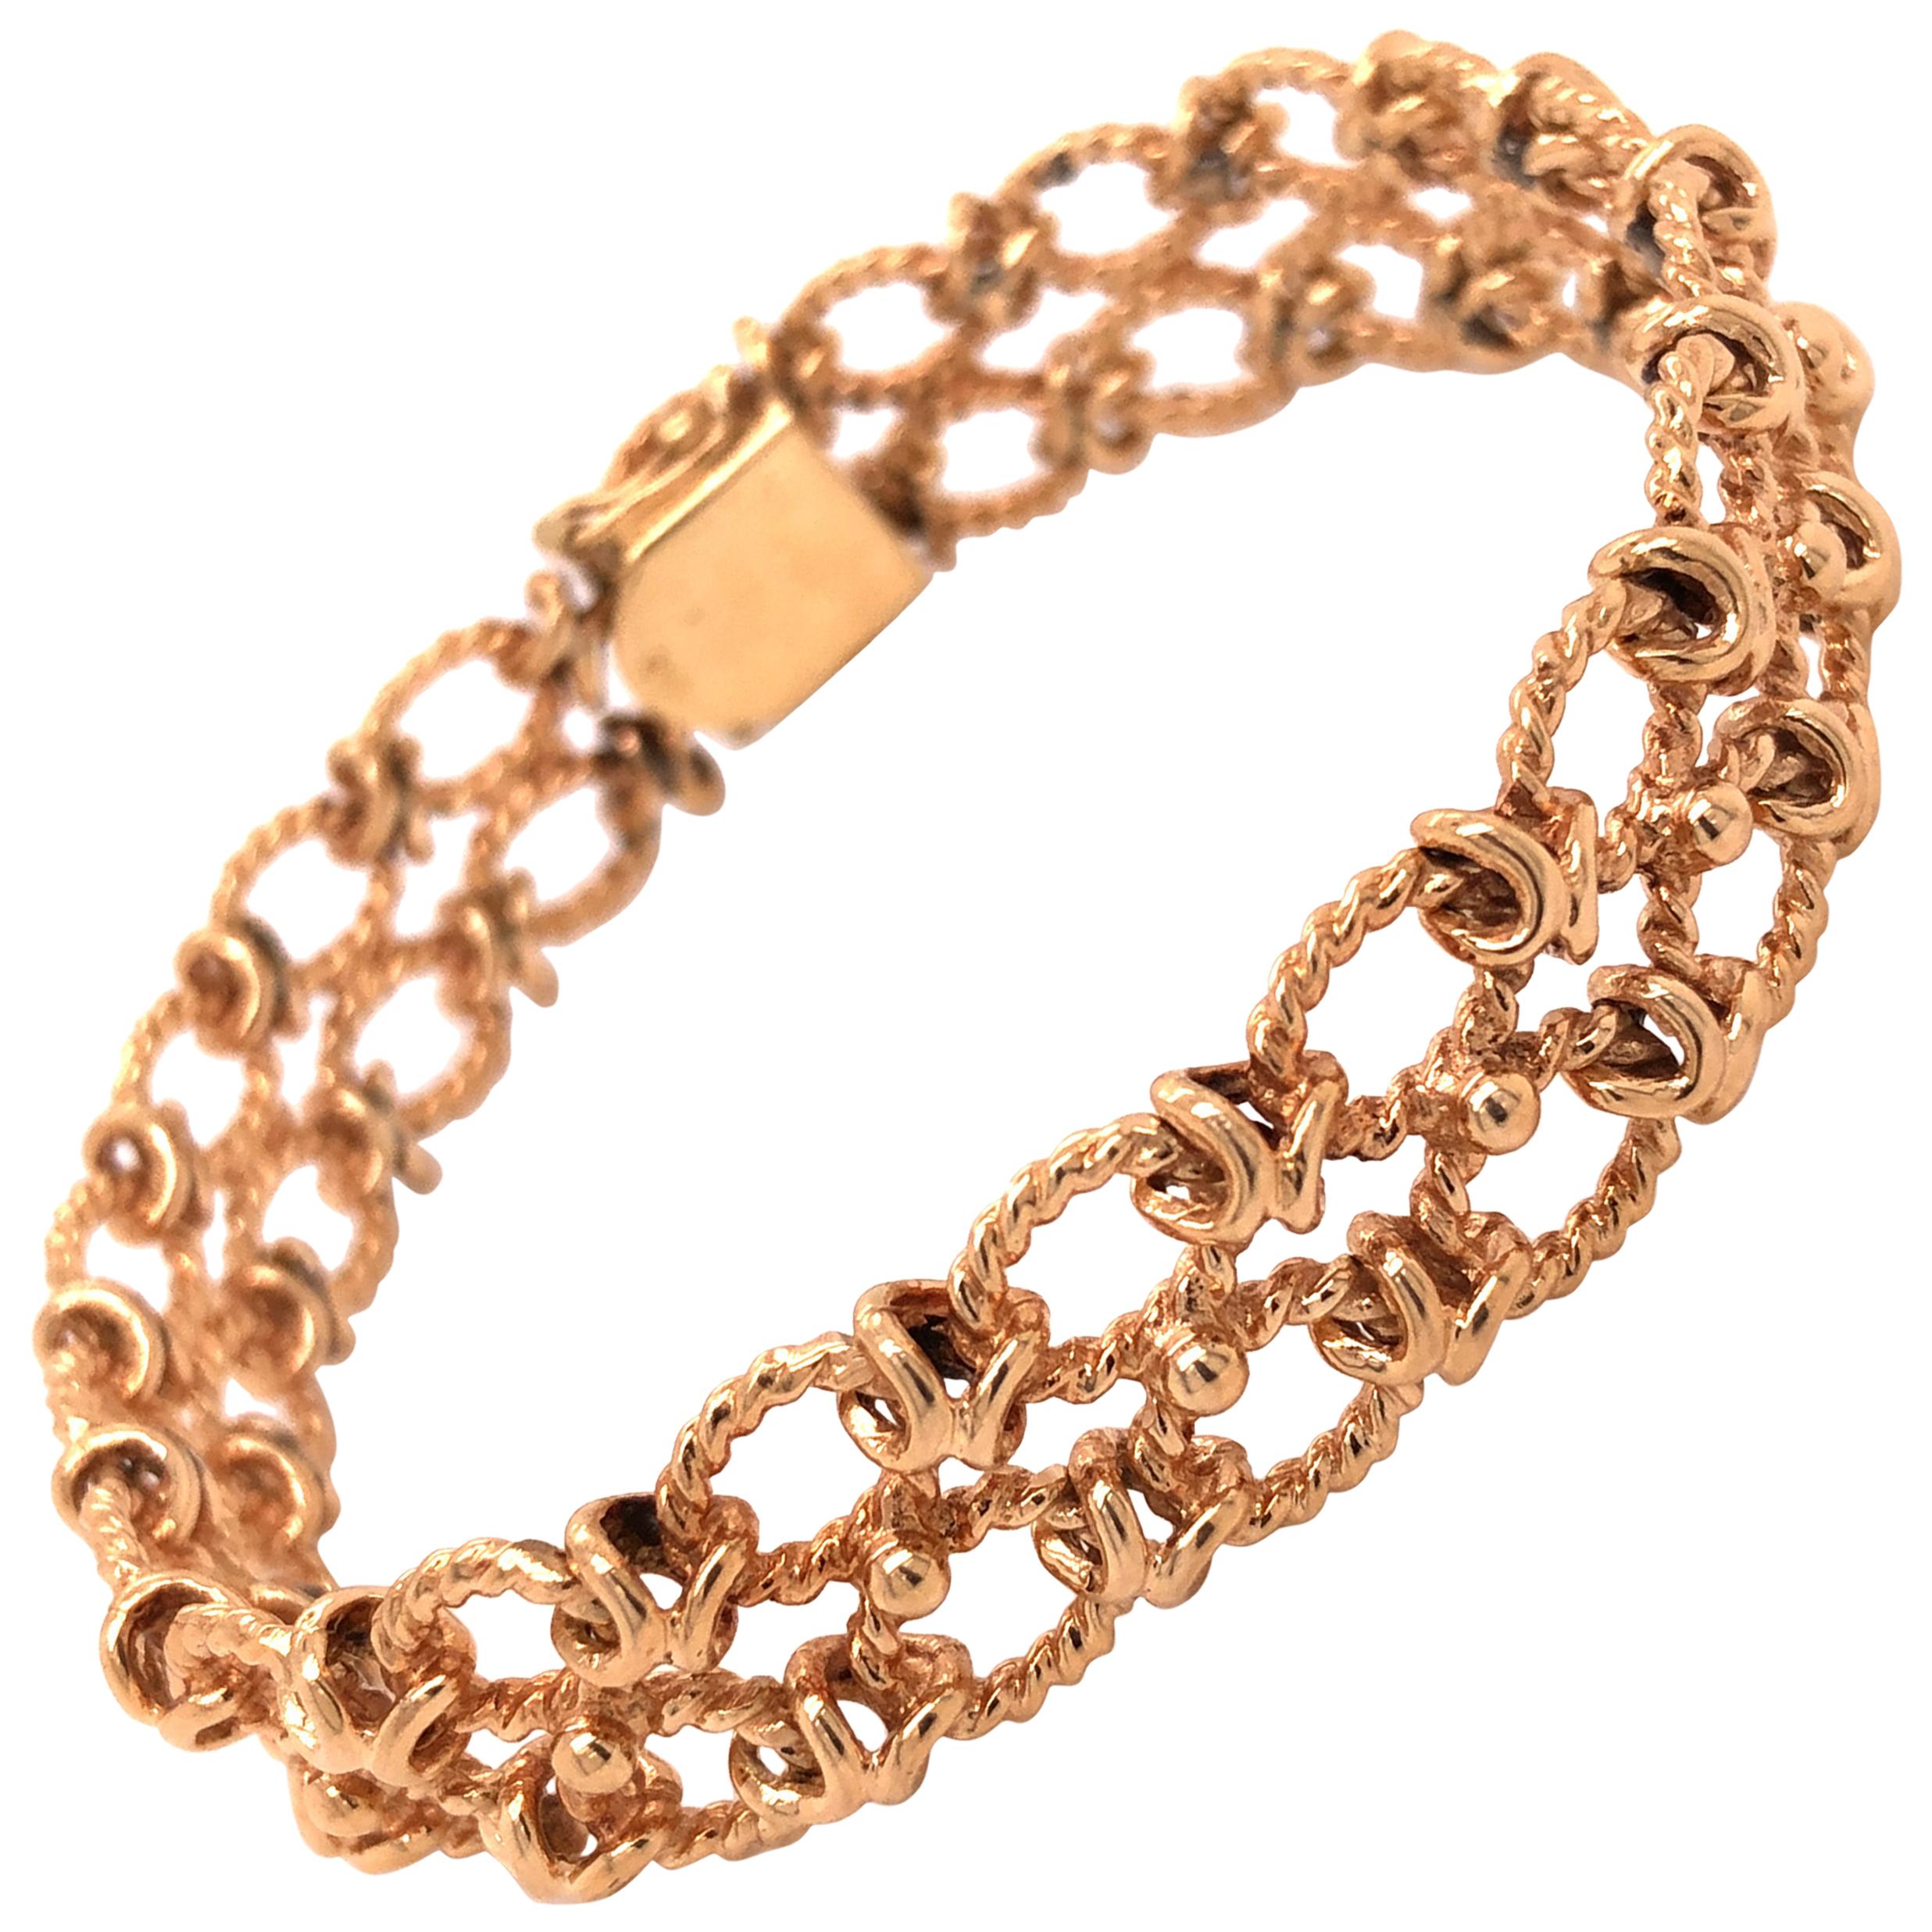 14-karat-yellow-gold-solid-fancy-textured-curb-link-charm-bracelet-for